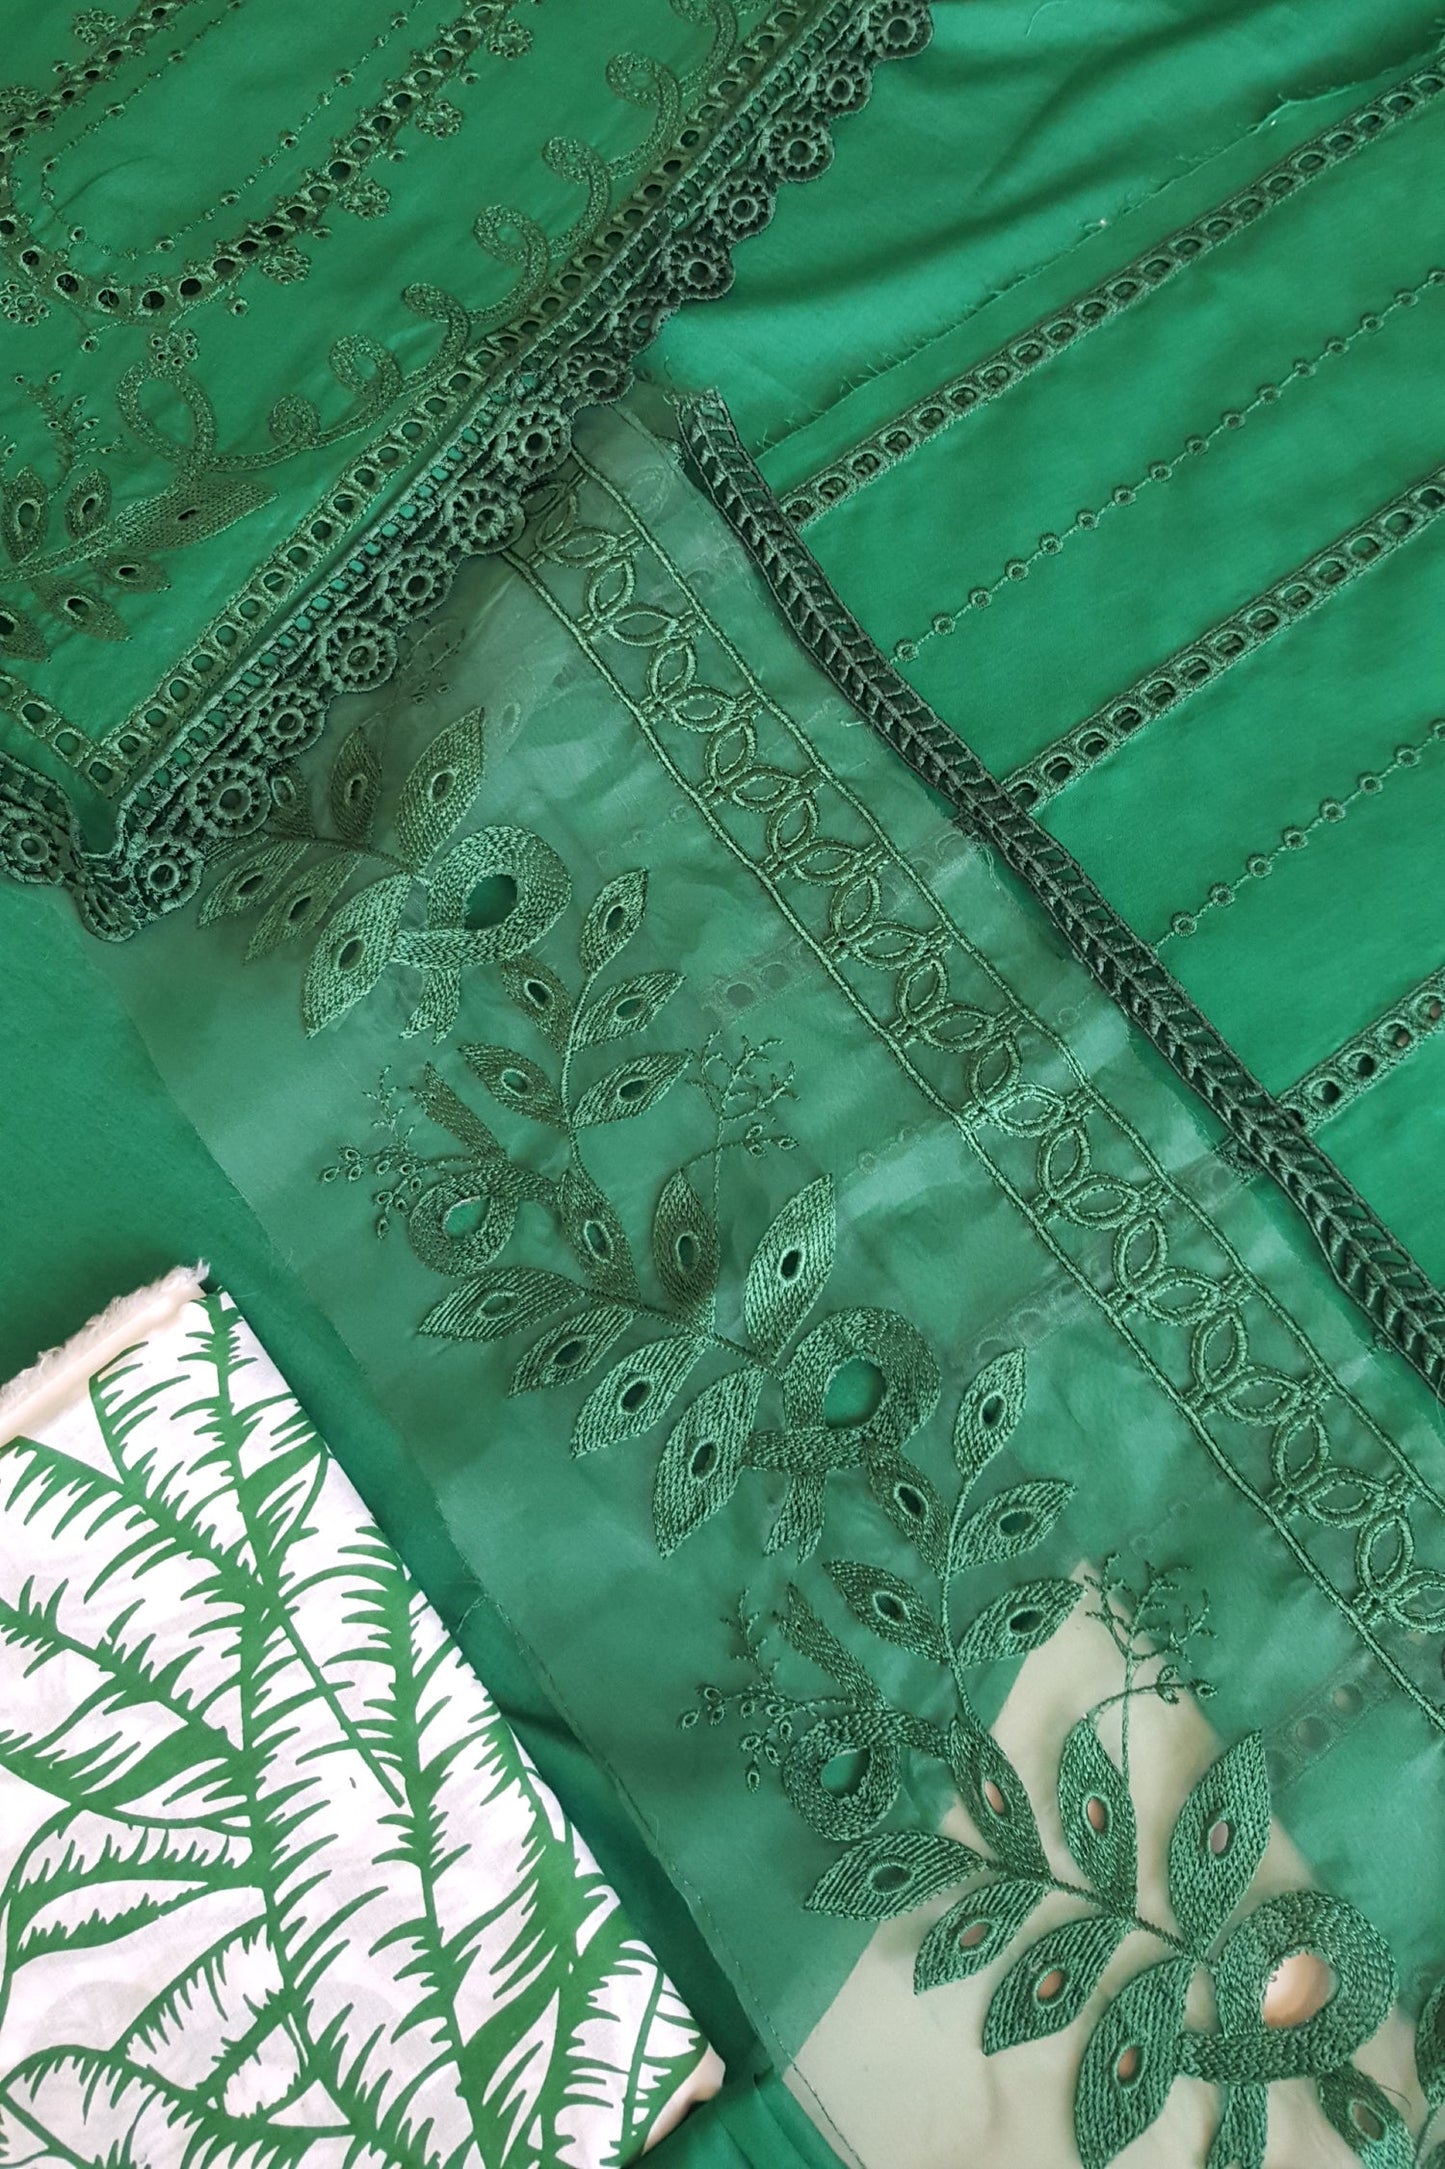 Bottle Green Embroidered Lawn Suit